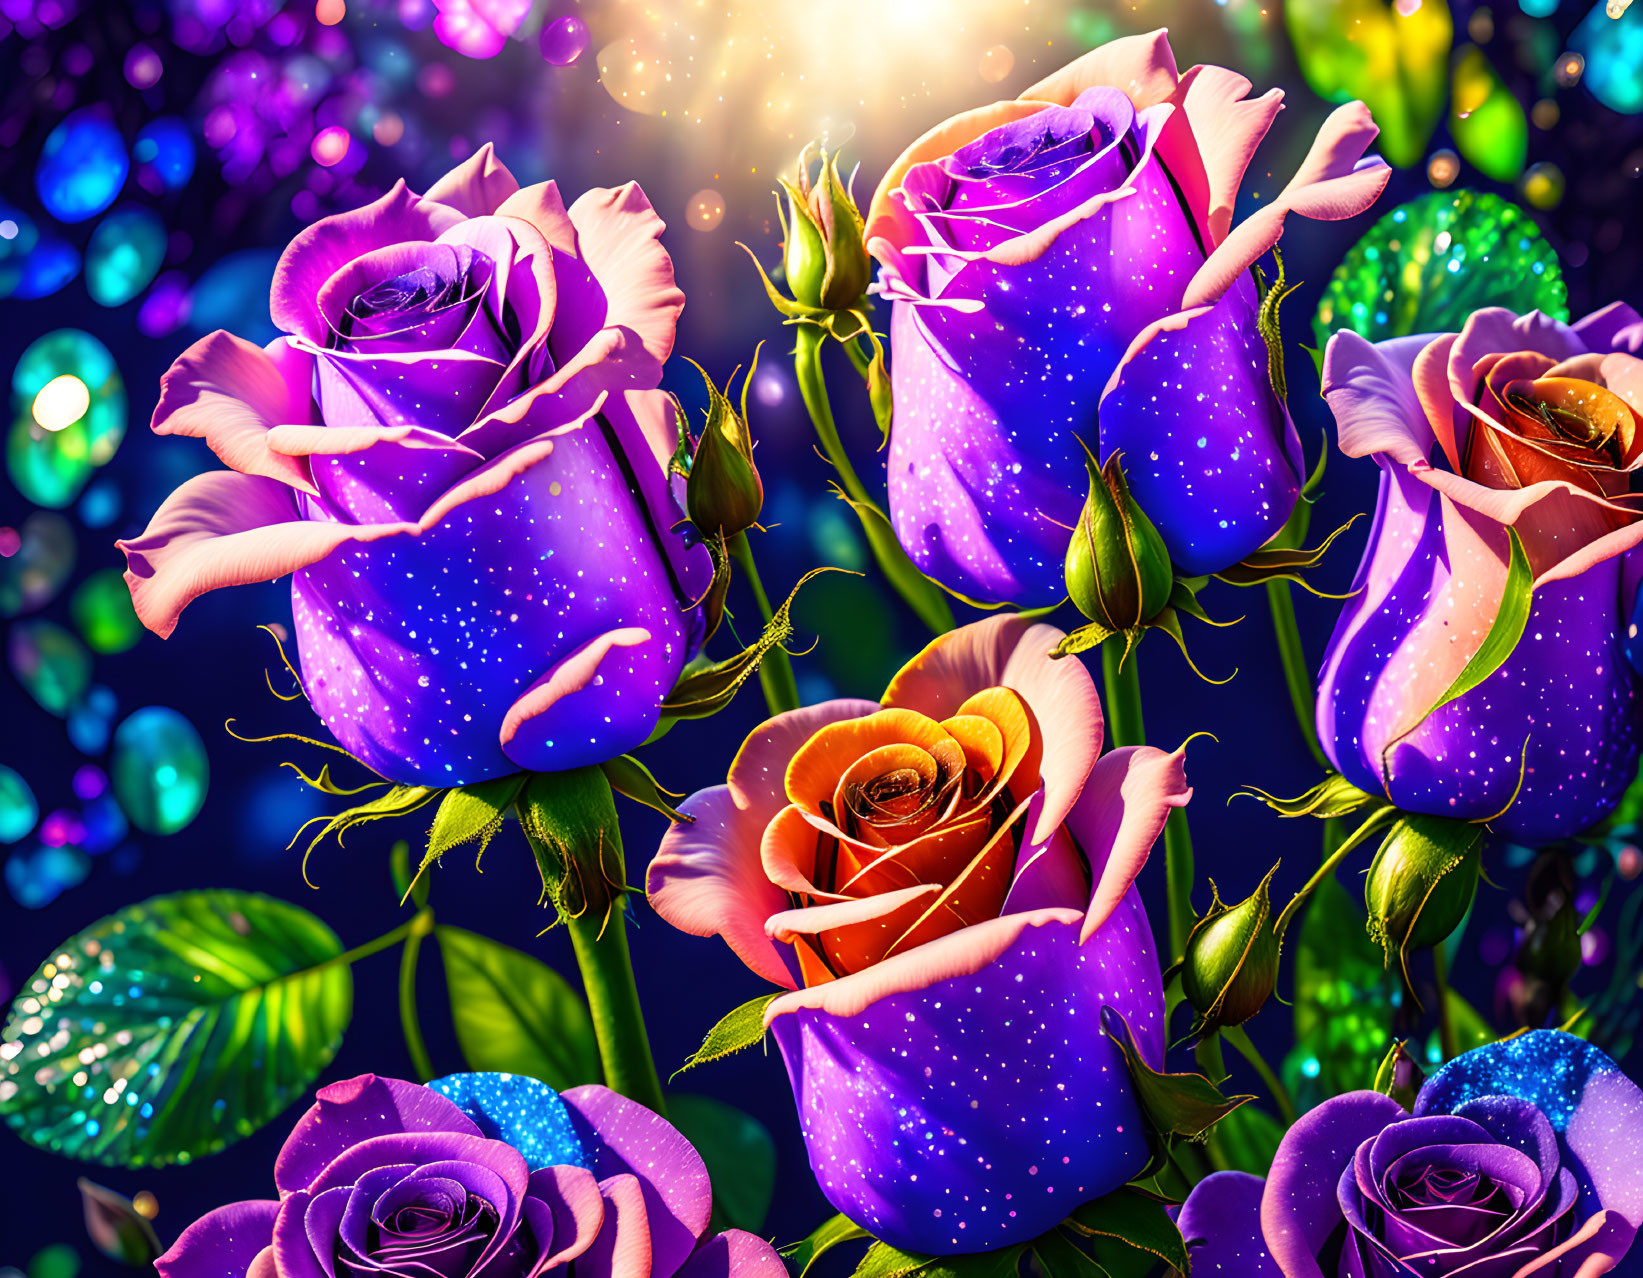 Colorful digital artwork featuring cosmic roses on bokeh background